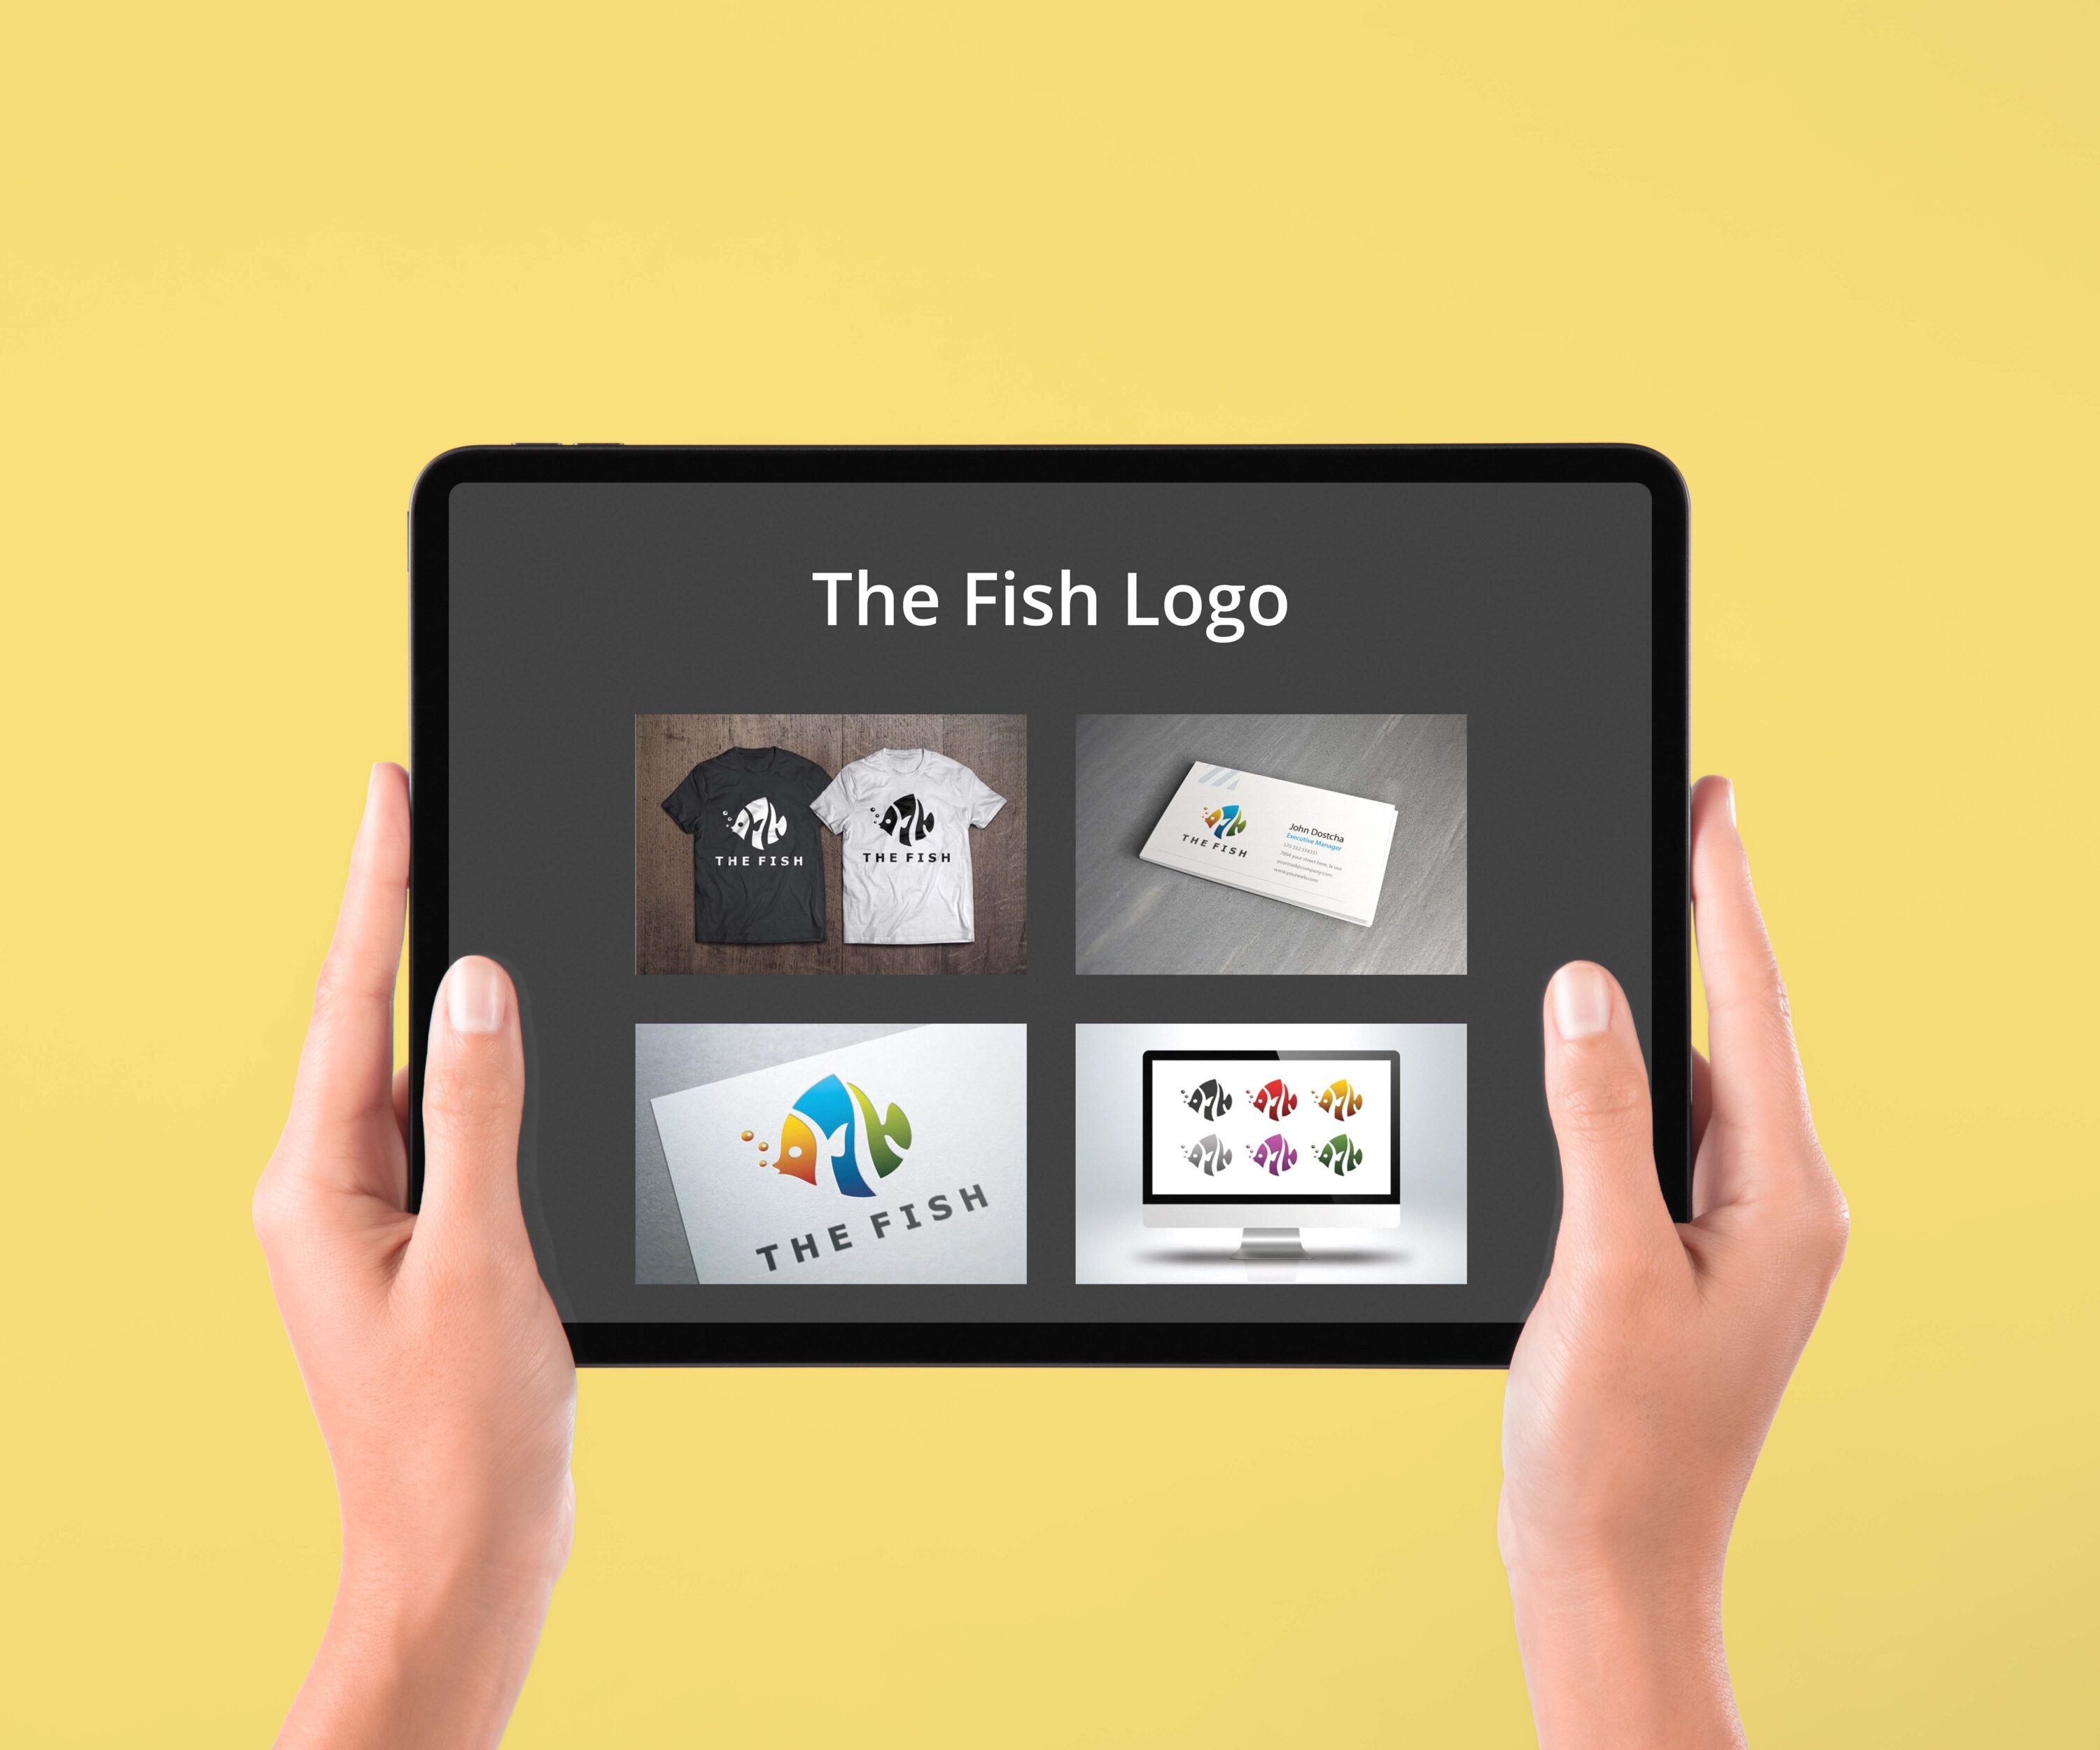 The Fish Logo - tablet.